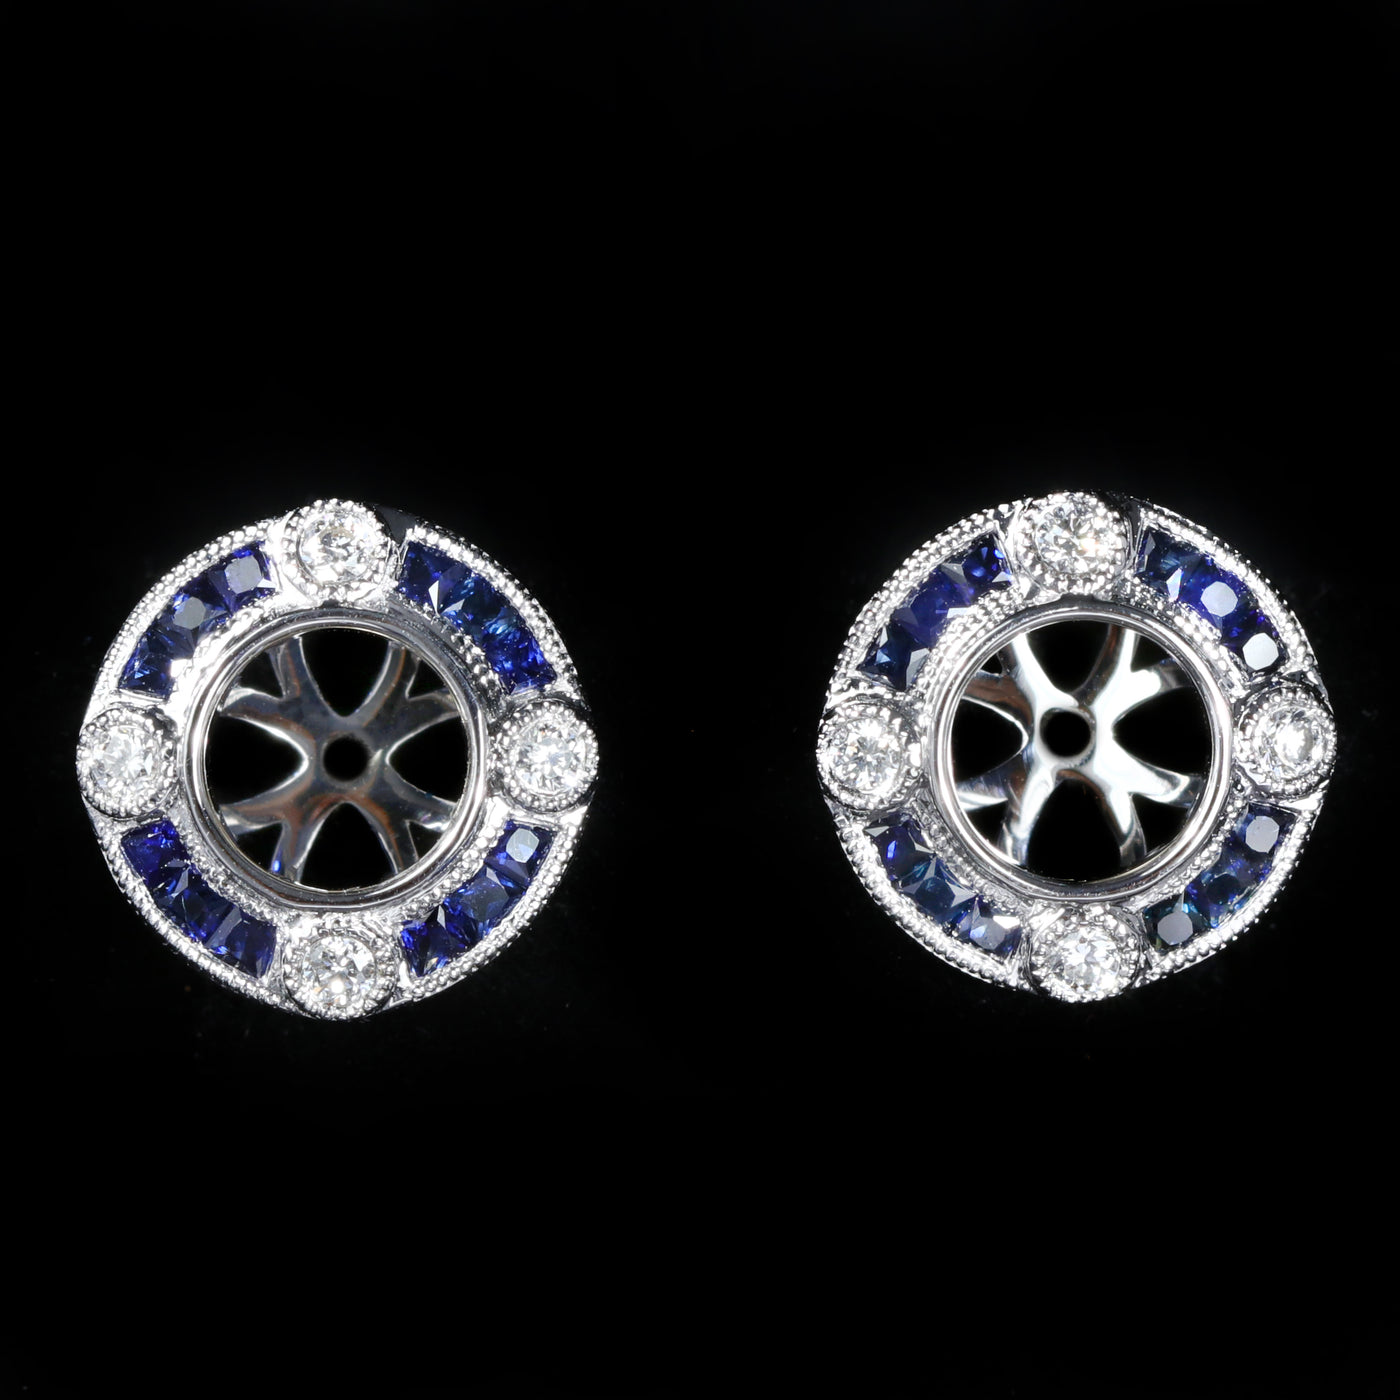 14k White Gold, Diamond, and Sapphire Earring Jackets